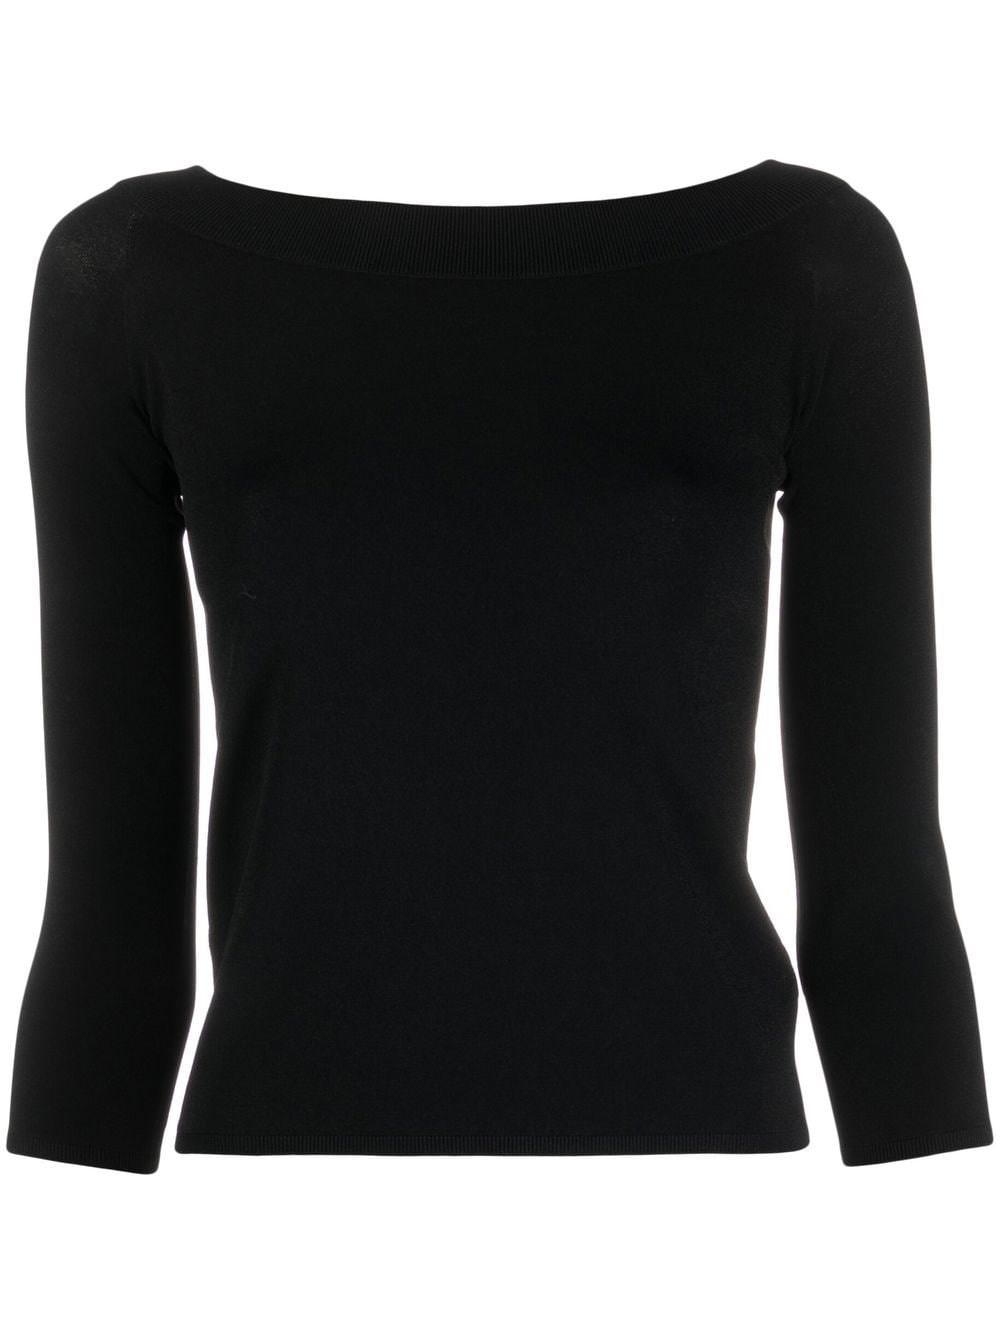 roberto collina TOP available on montiboutique.com - 53749